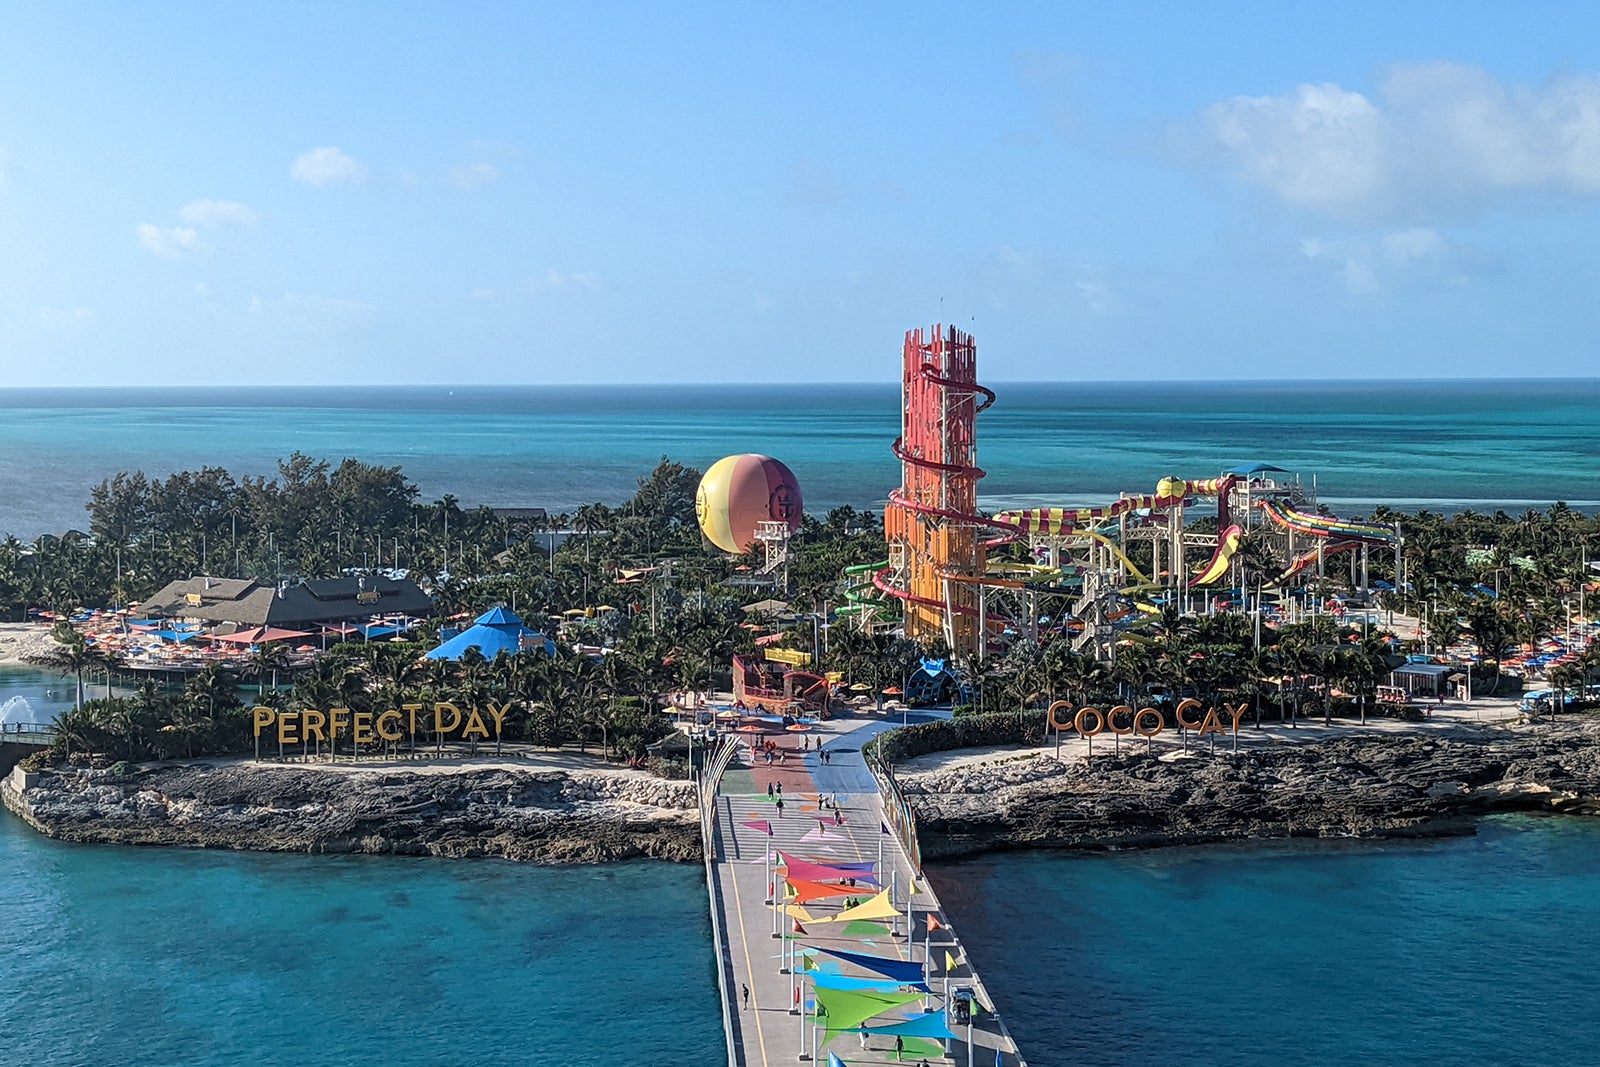 Royal Caribbean's Perfect Day at CocoCay guide - The Points Guy